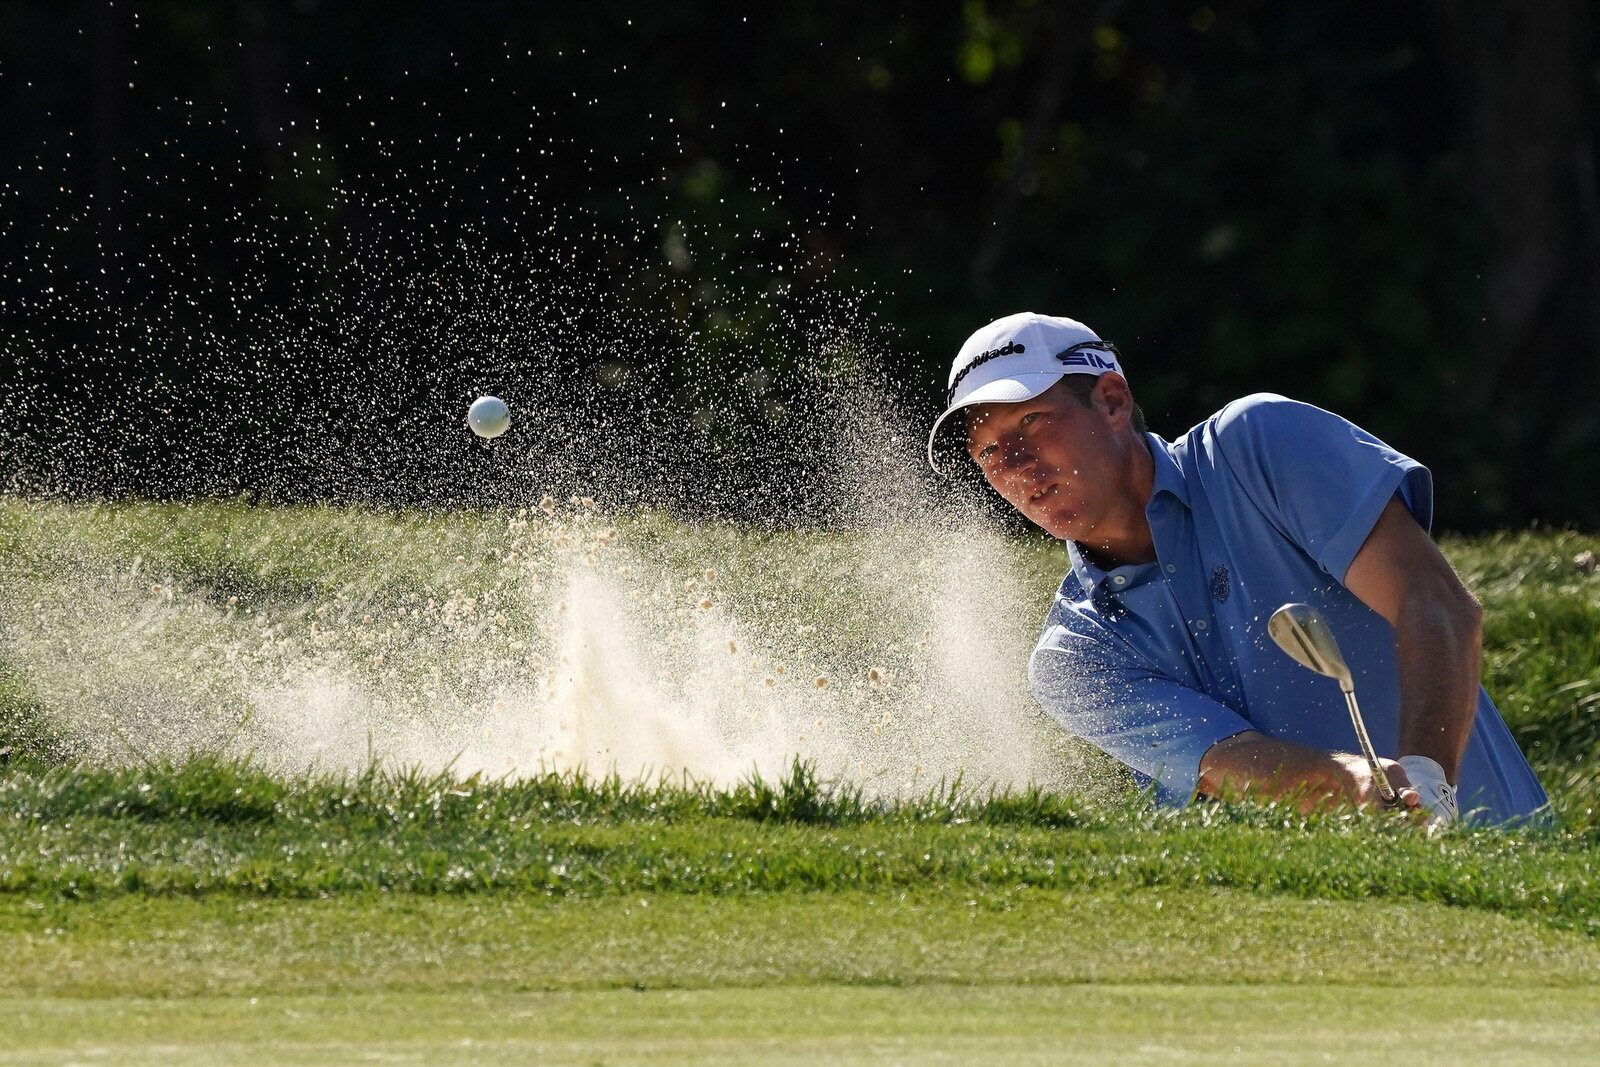  OLYMPIA FIELDS, ILLINOIS - AUGUST 28: Jim Herman of the United States plays a shot from a bunker on the first hole during the second round of the BMW Championship on the North Course at Olympia Fields Country Club on August 28, 2020 in Olympia Field